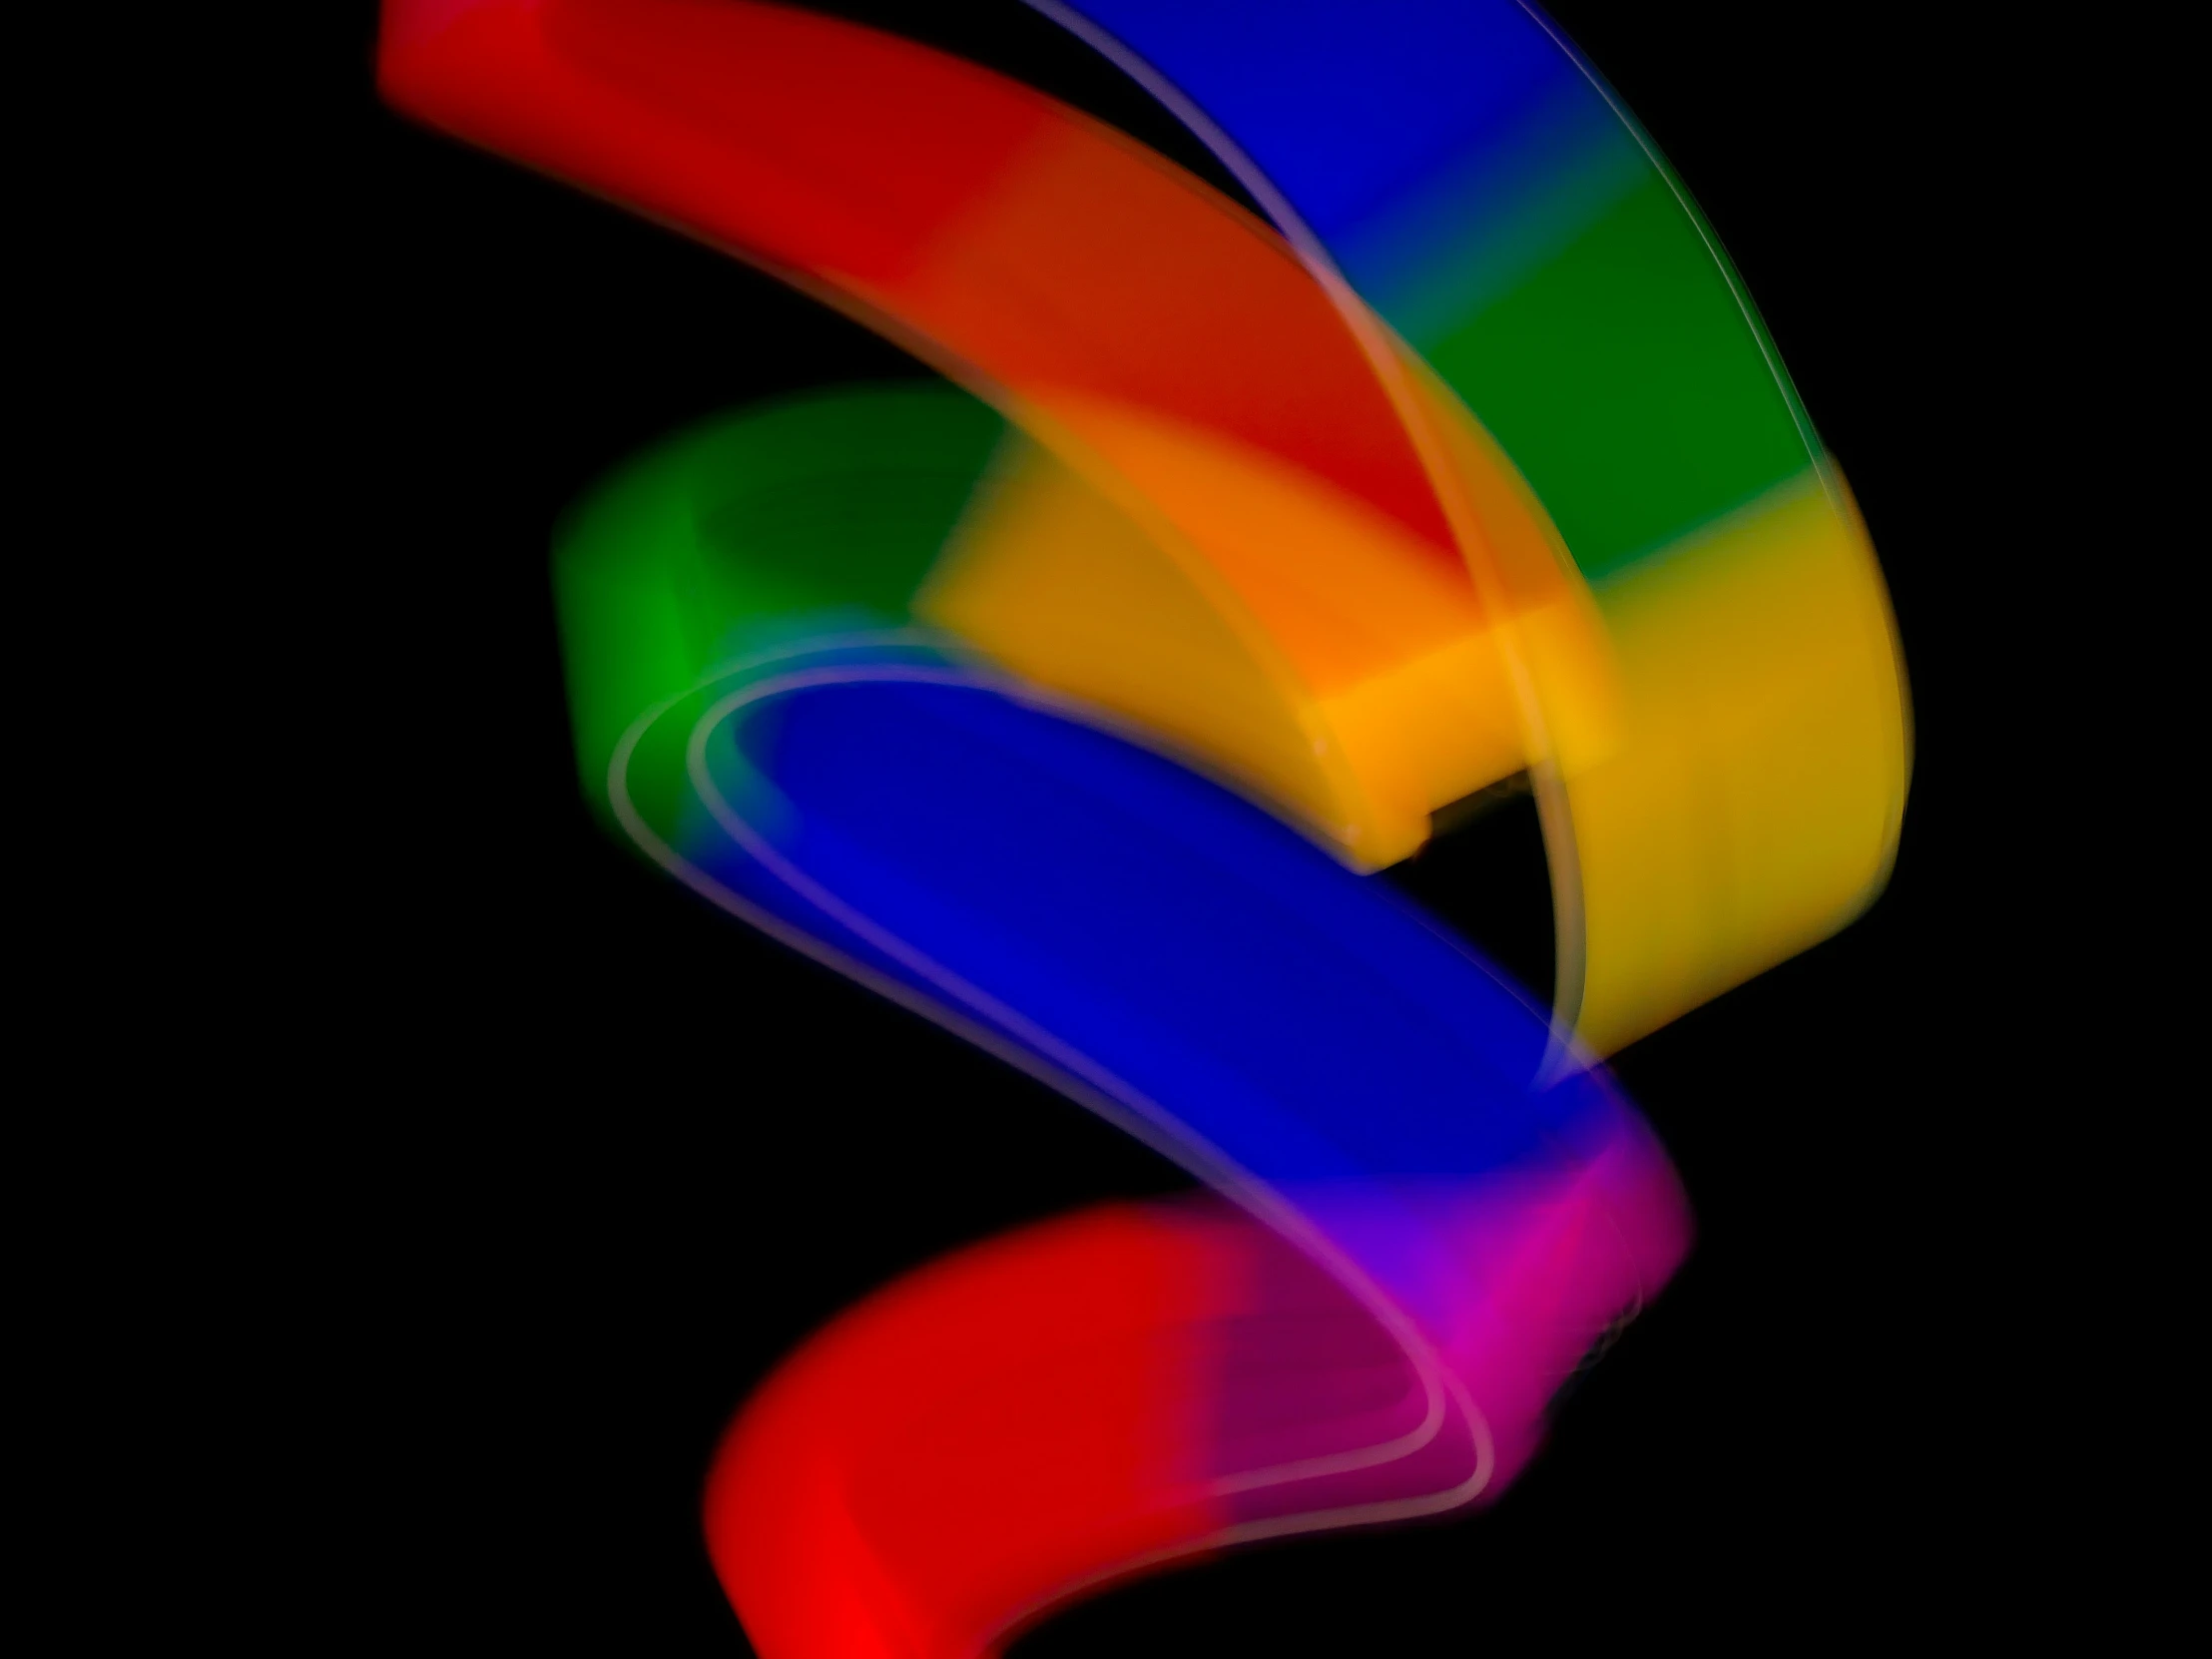 colorful spiral design of rainbow colors with black background